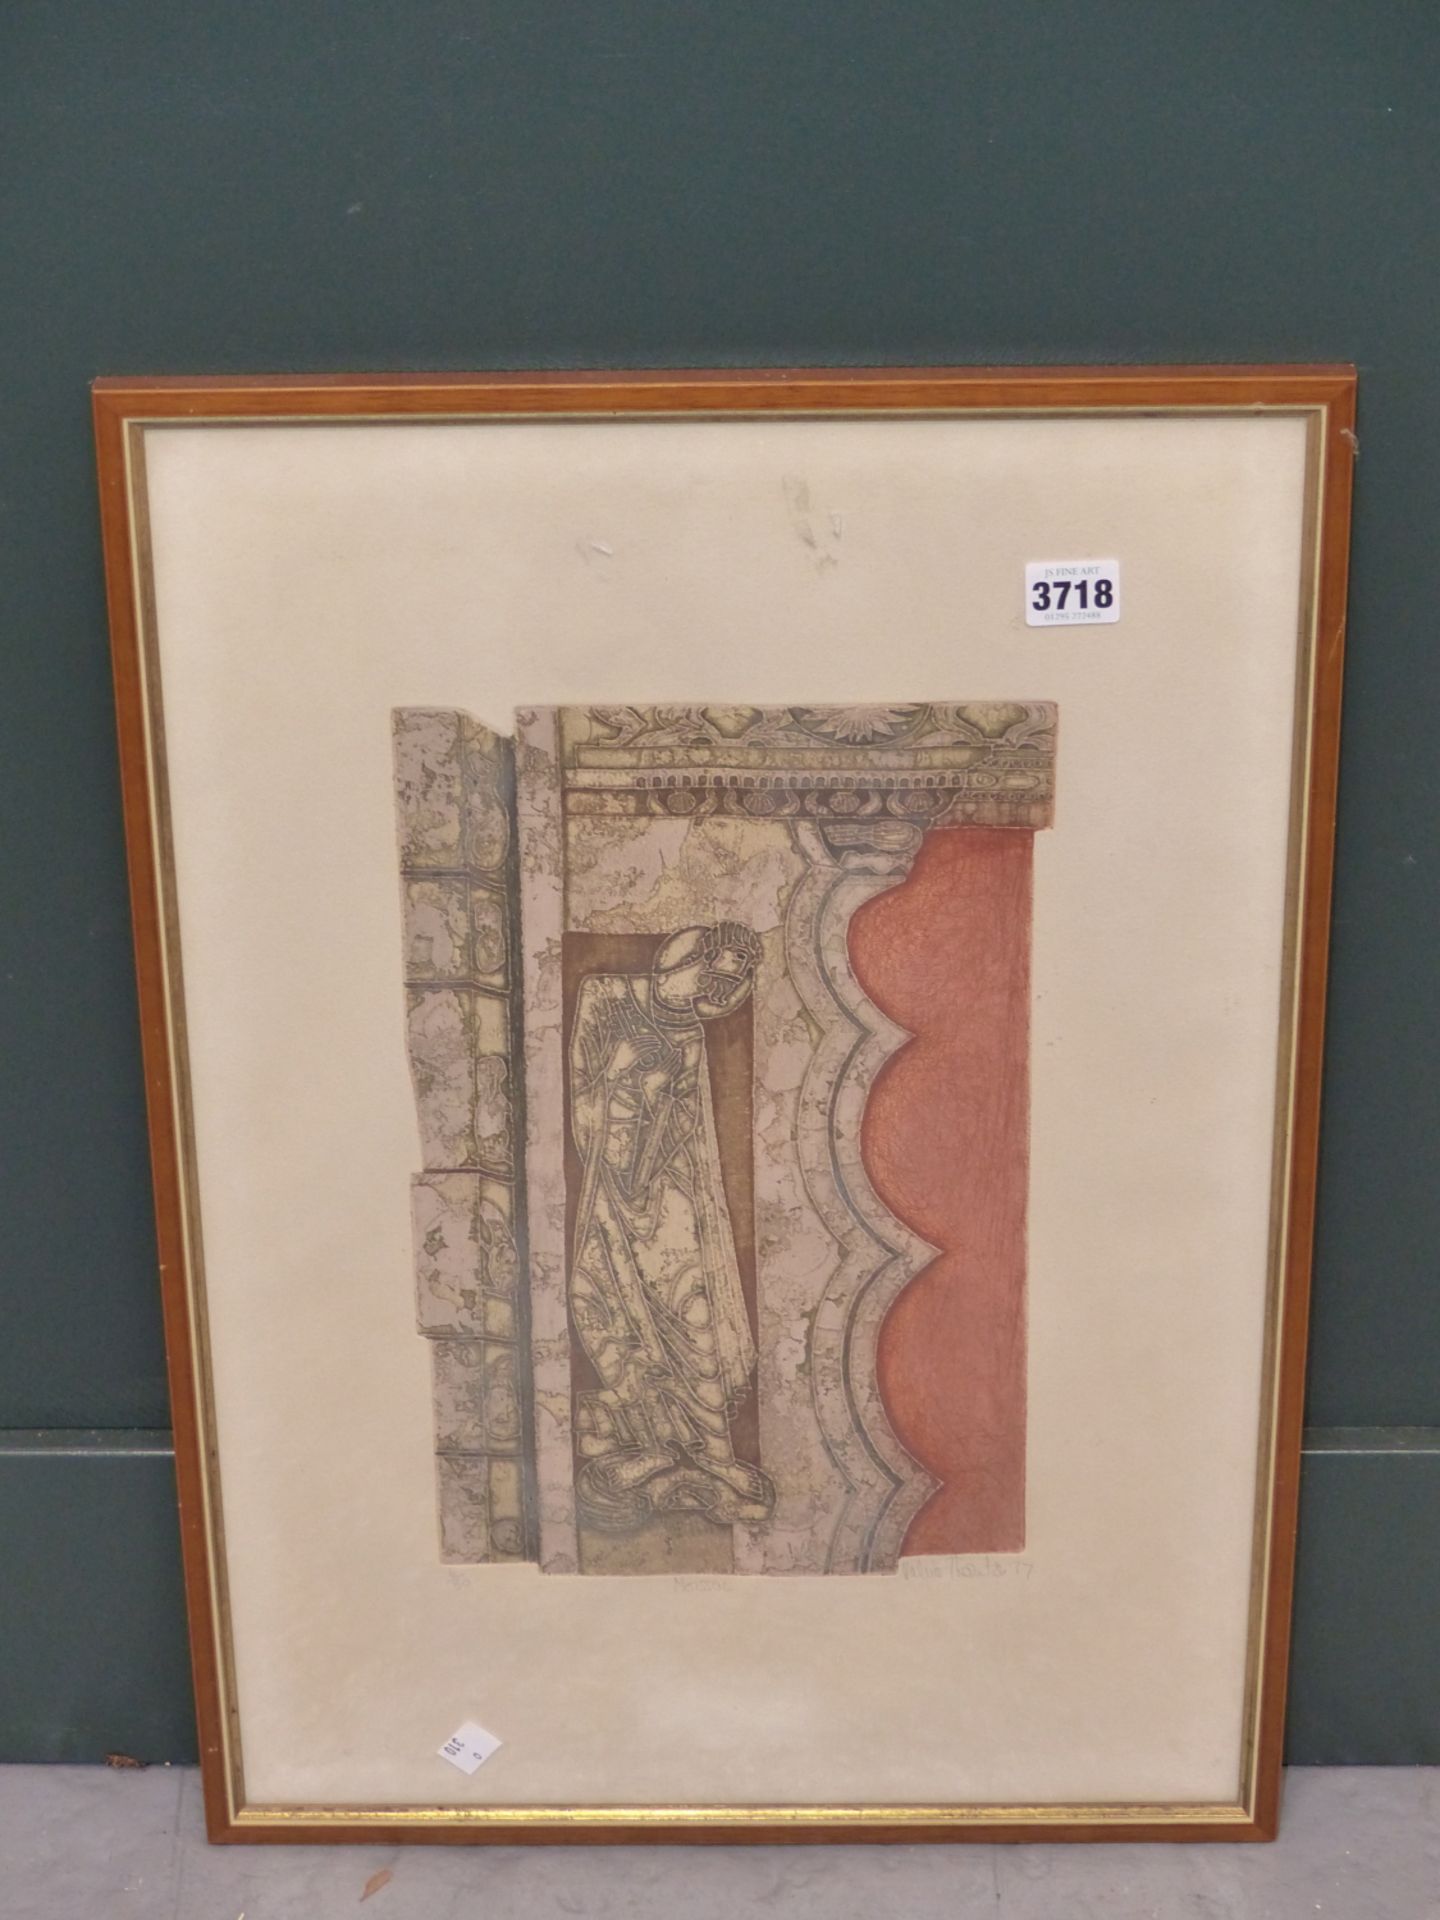 VALERIE THORNTON (1931- 1991) ARR. MOSAIC, COLOUR ETCHING. LIMITED EDITION No 6/50 SIGNED LOWER - Image 2 of 5